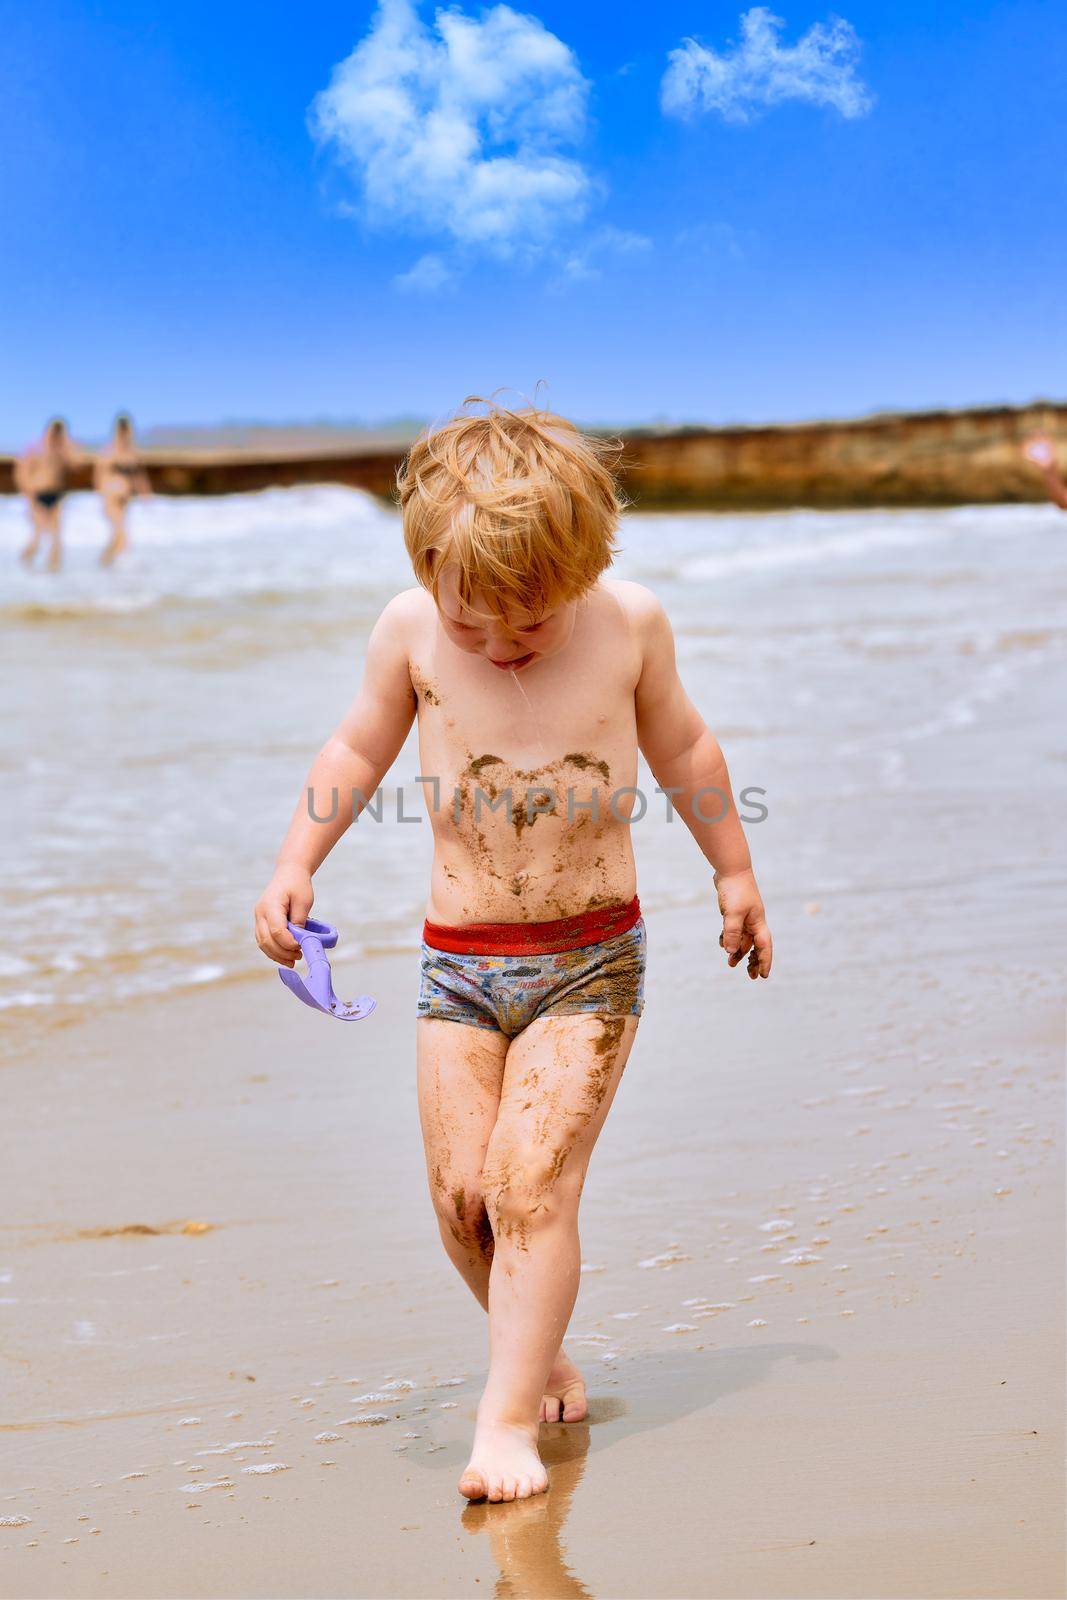 A little boy gets dirty in mud and walks crying along the beach by vizland